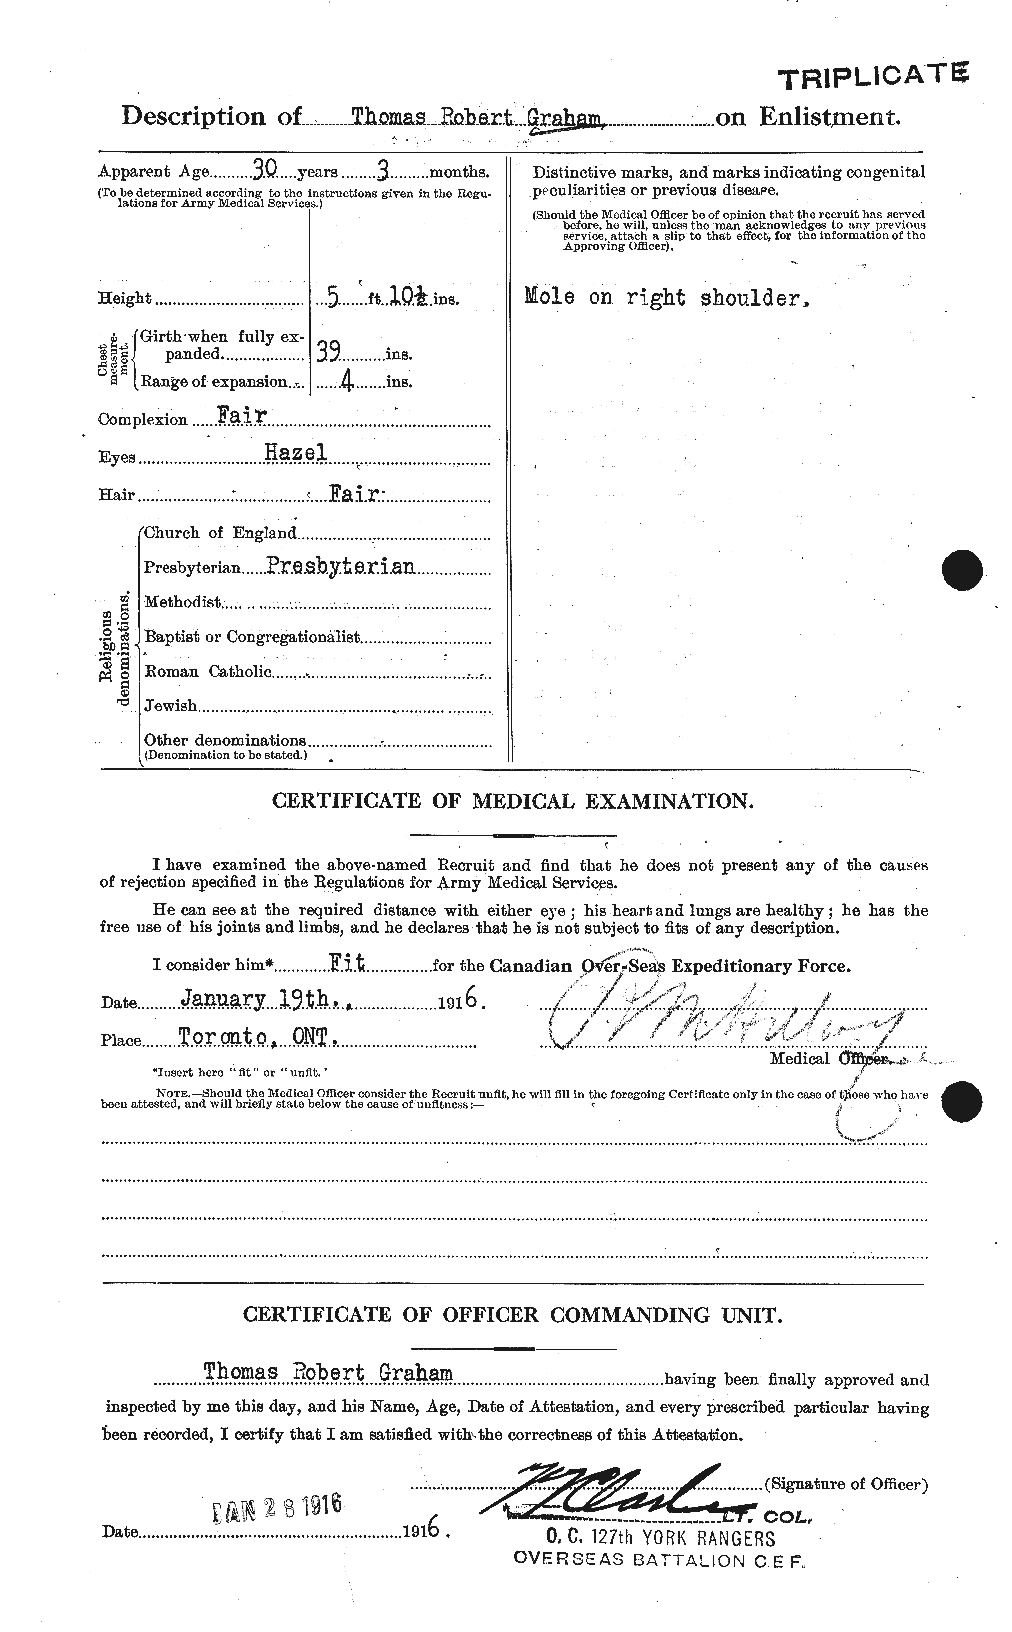 Personnel Records of the First World War - CEF 359527b